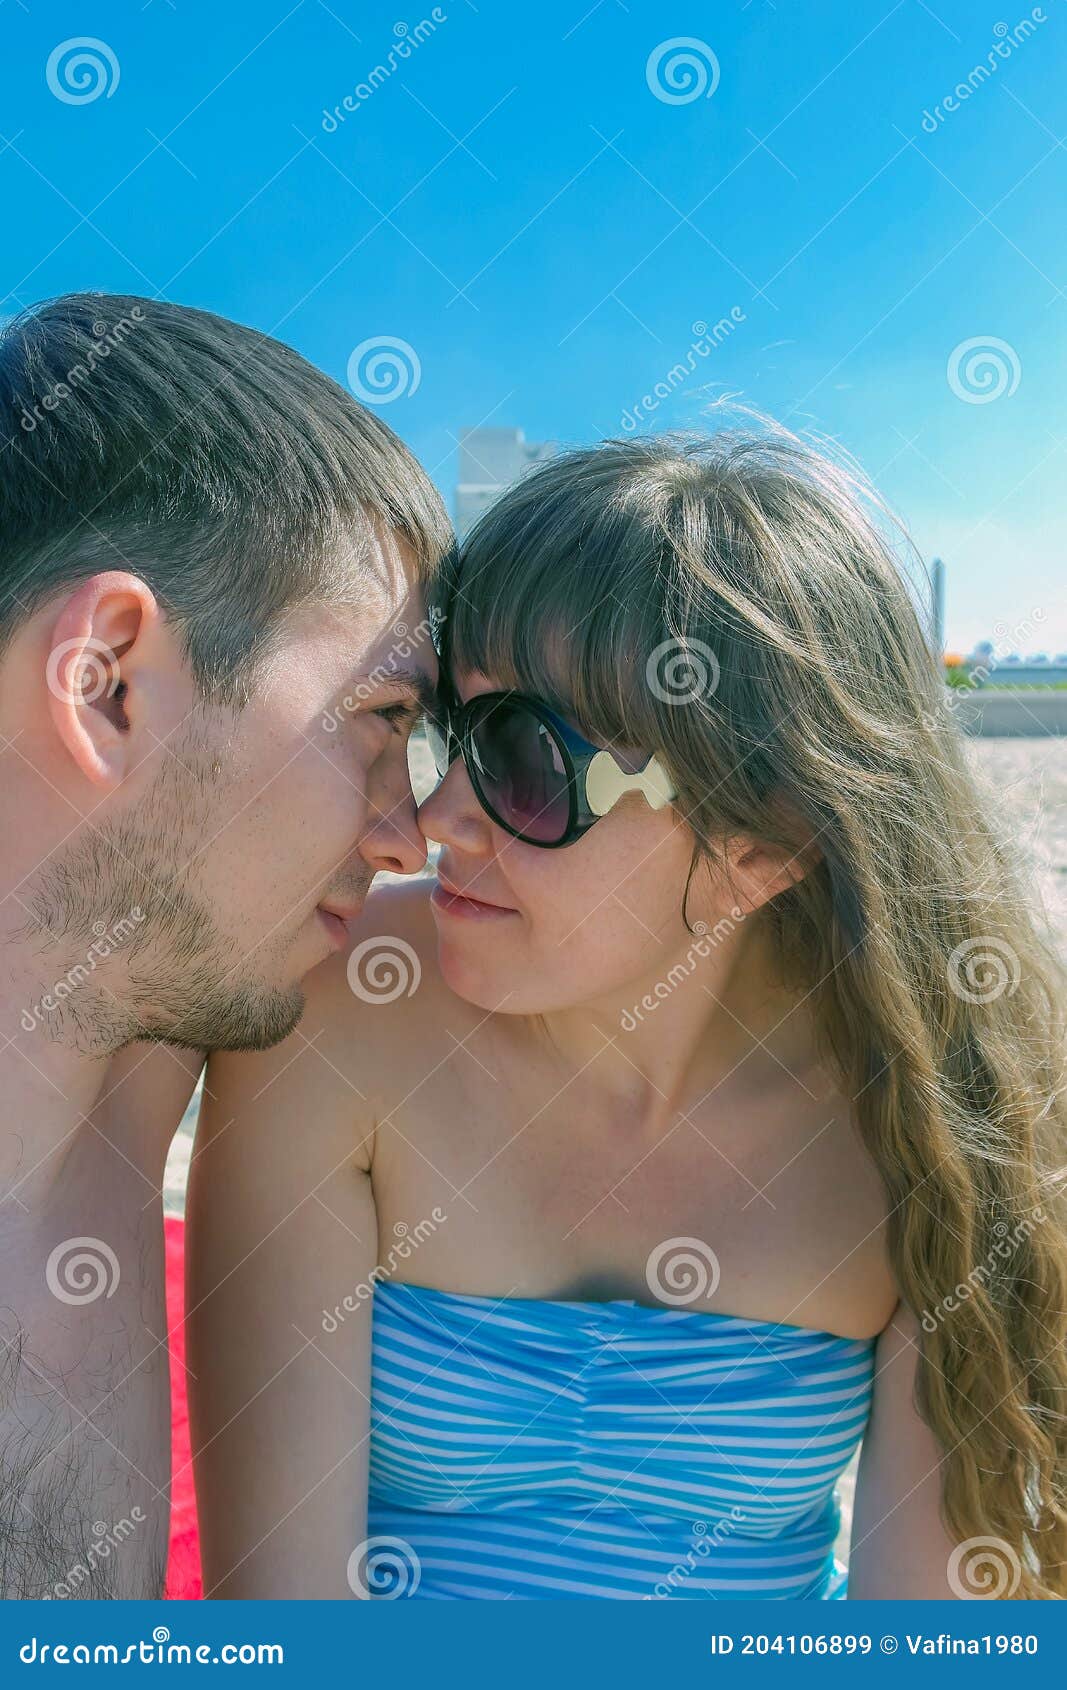 Happy Couple in Love Embracing Each Other, Looking with Love and Taking  Selfies. Young Man and Woman Sitting on Beach Enjoying Stock Image - Image  of holiday, love: 204106899